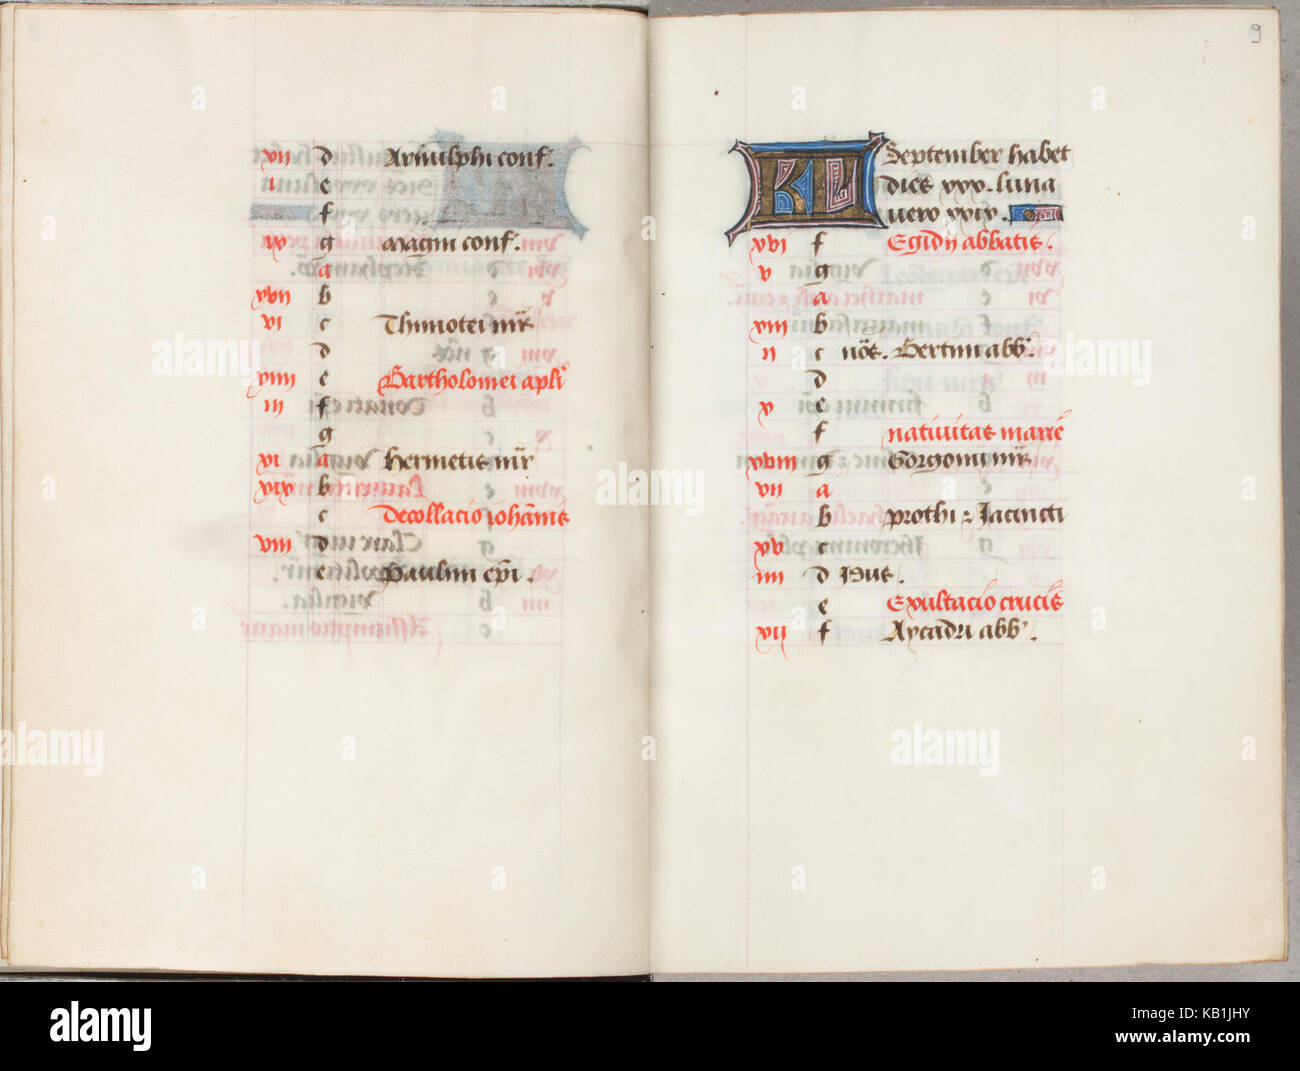 Trivulzio book of hours   KW SMC 1   Calendar for the month of September Stock Photo